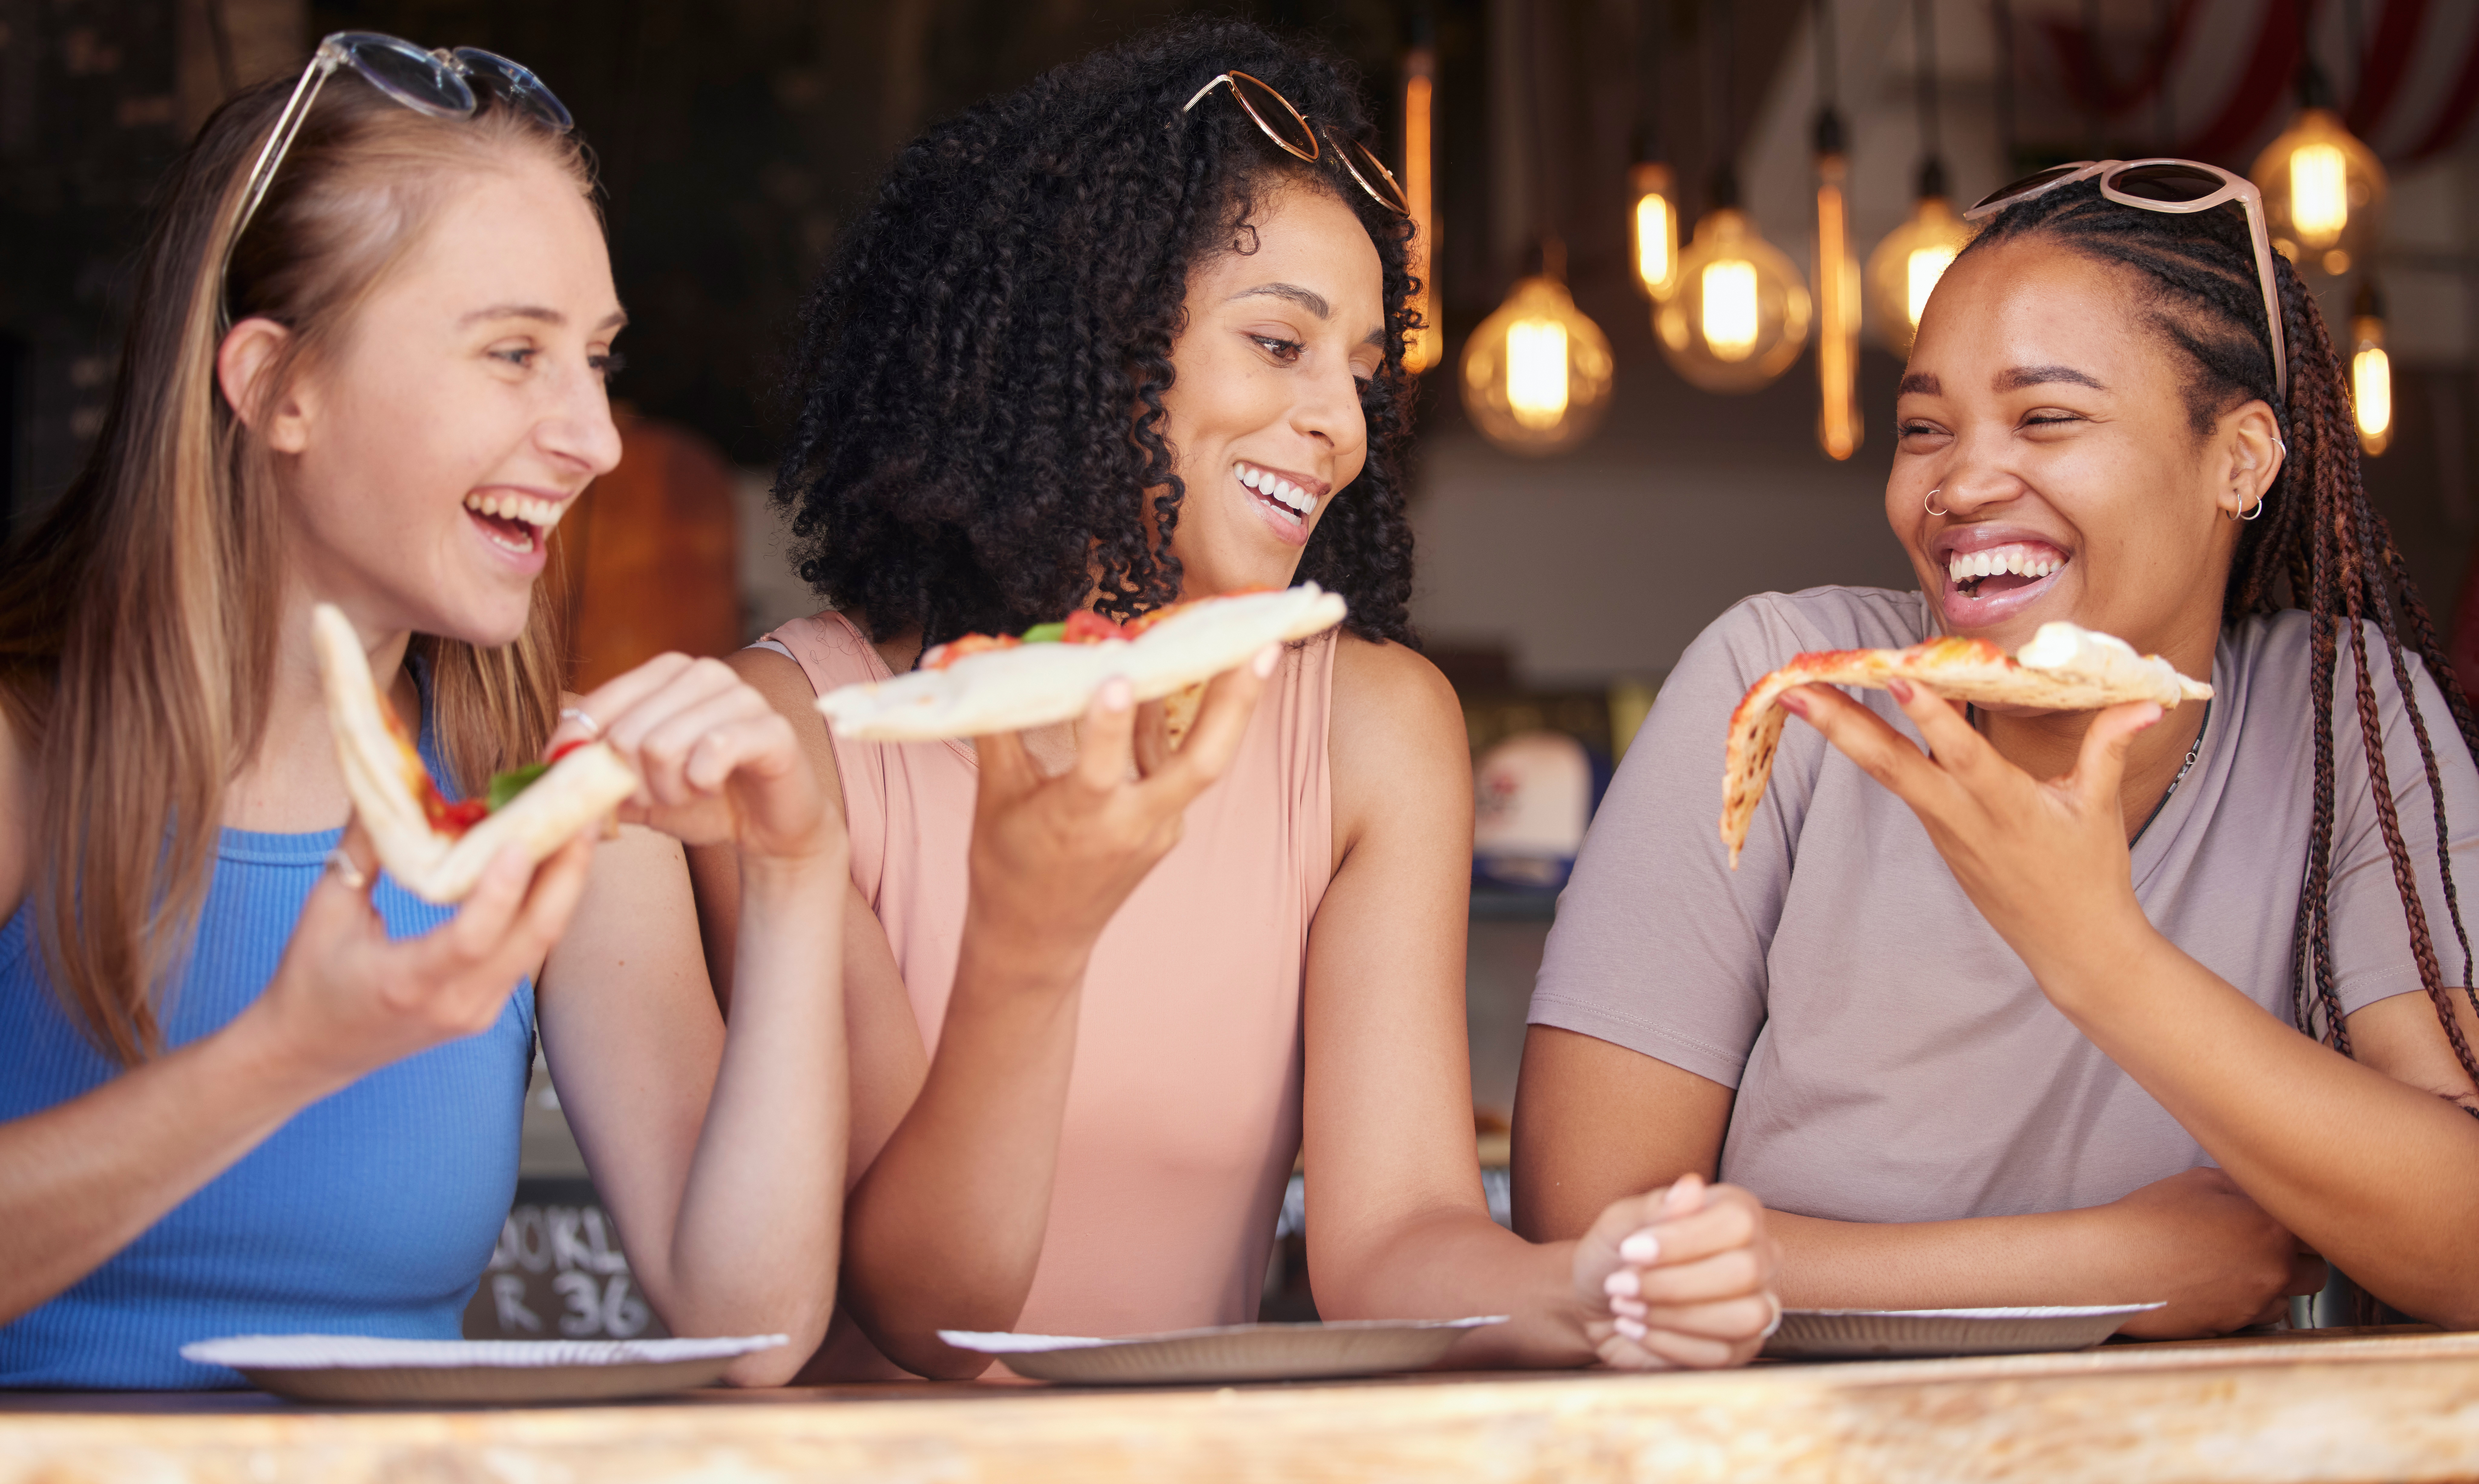 Unleashing Creative Marketing Campaigns for Limited Service Pizza Brands